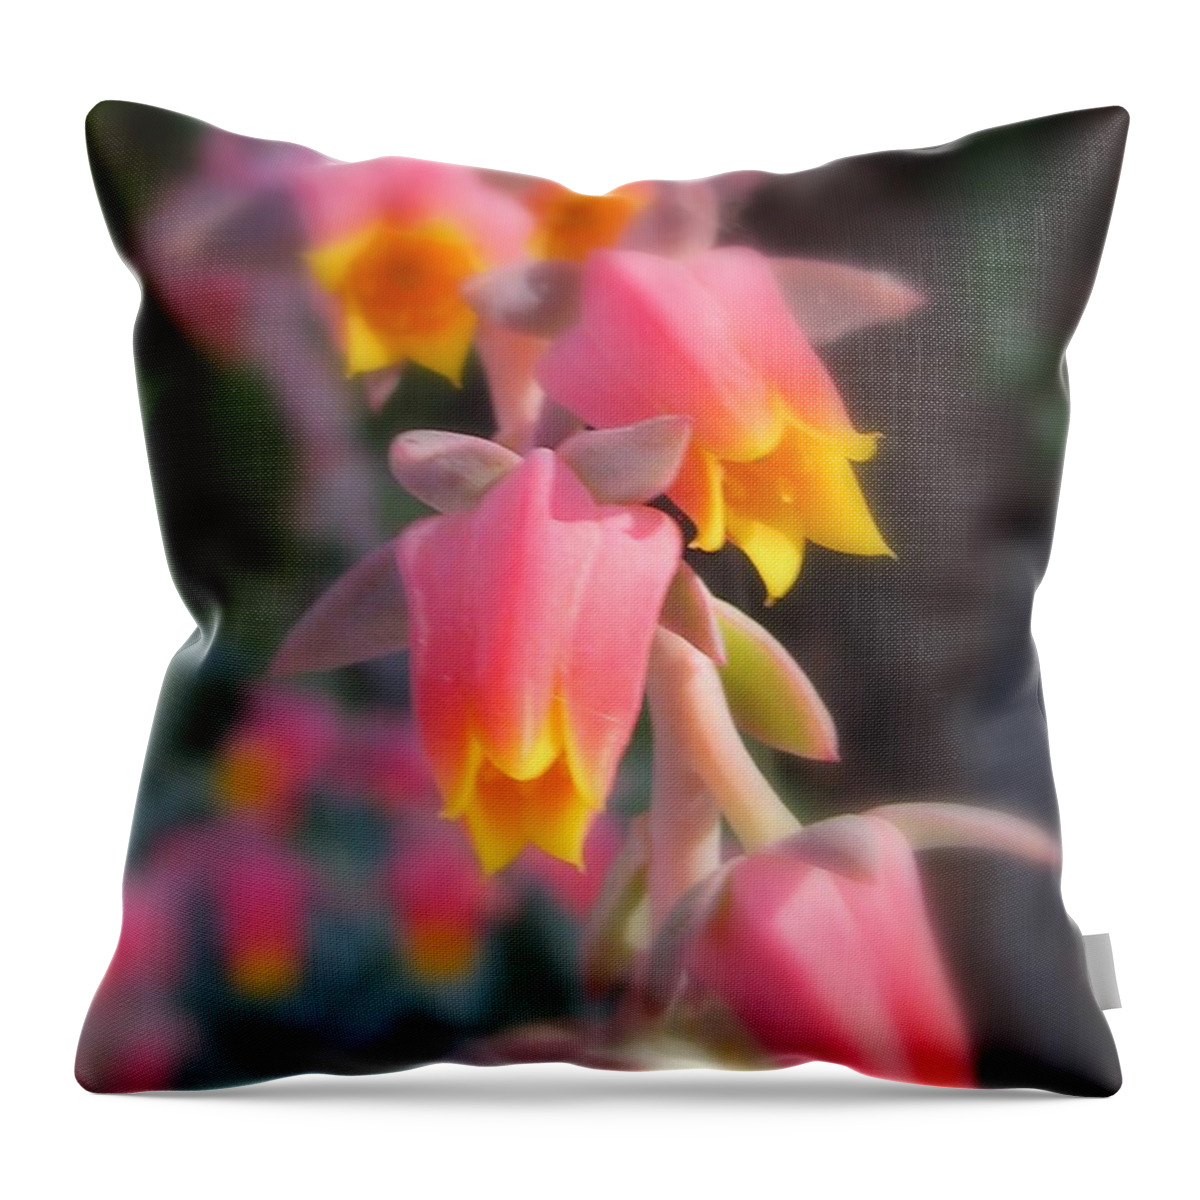 Flower Throw Pillow featuring the photograph Compelled by Tina Marie